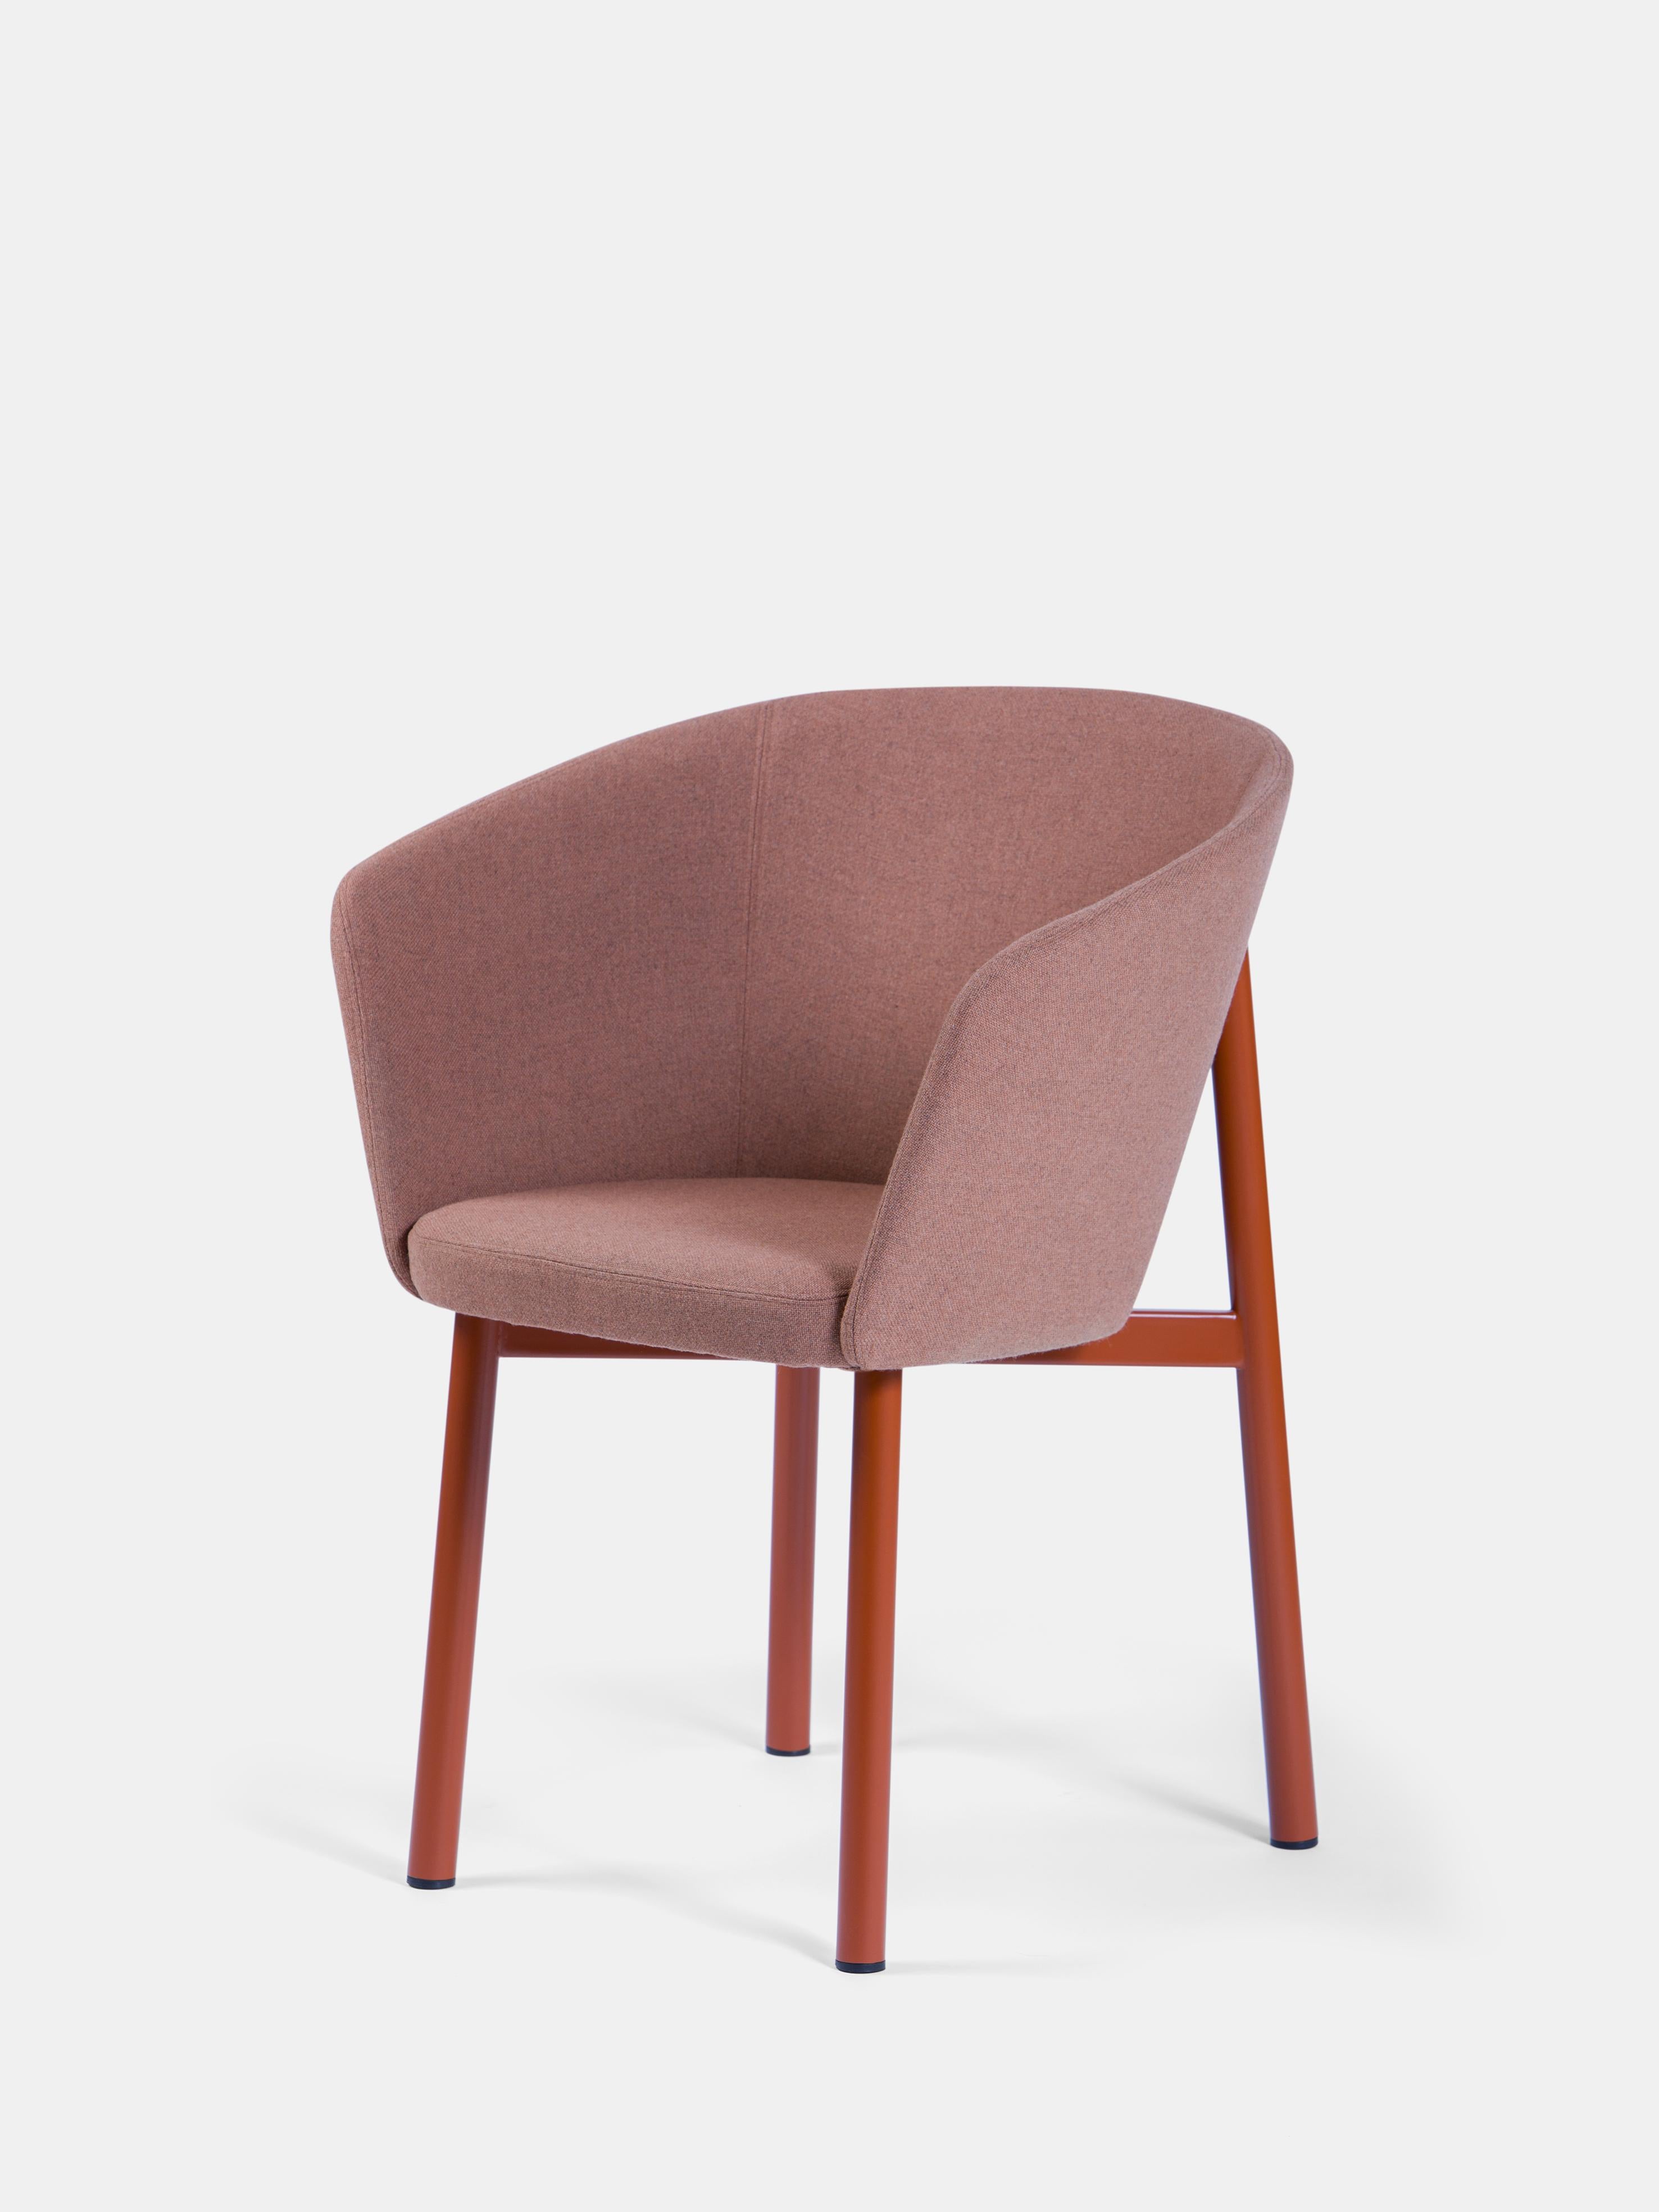 Set of 4 Dusty Pink Residence Bridge Armchair by Kann Design
Dimensions: D 52 x W 59.5 x H 80 cm.
Materials: Steel tube, HR foam, fabric upholstery Kvadrat Tonica 523 (100% wool).
Available in other fabrics.

All of the Residence seats were created